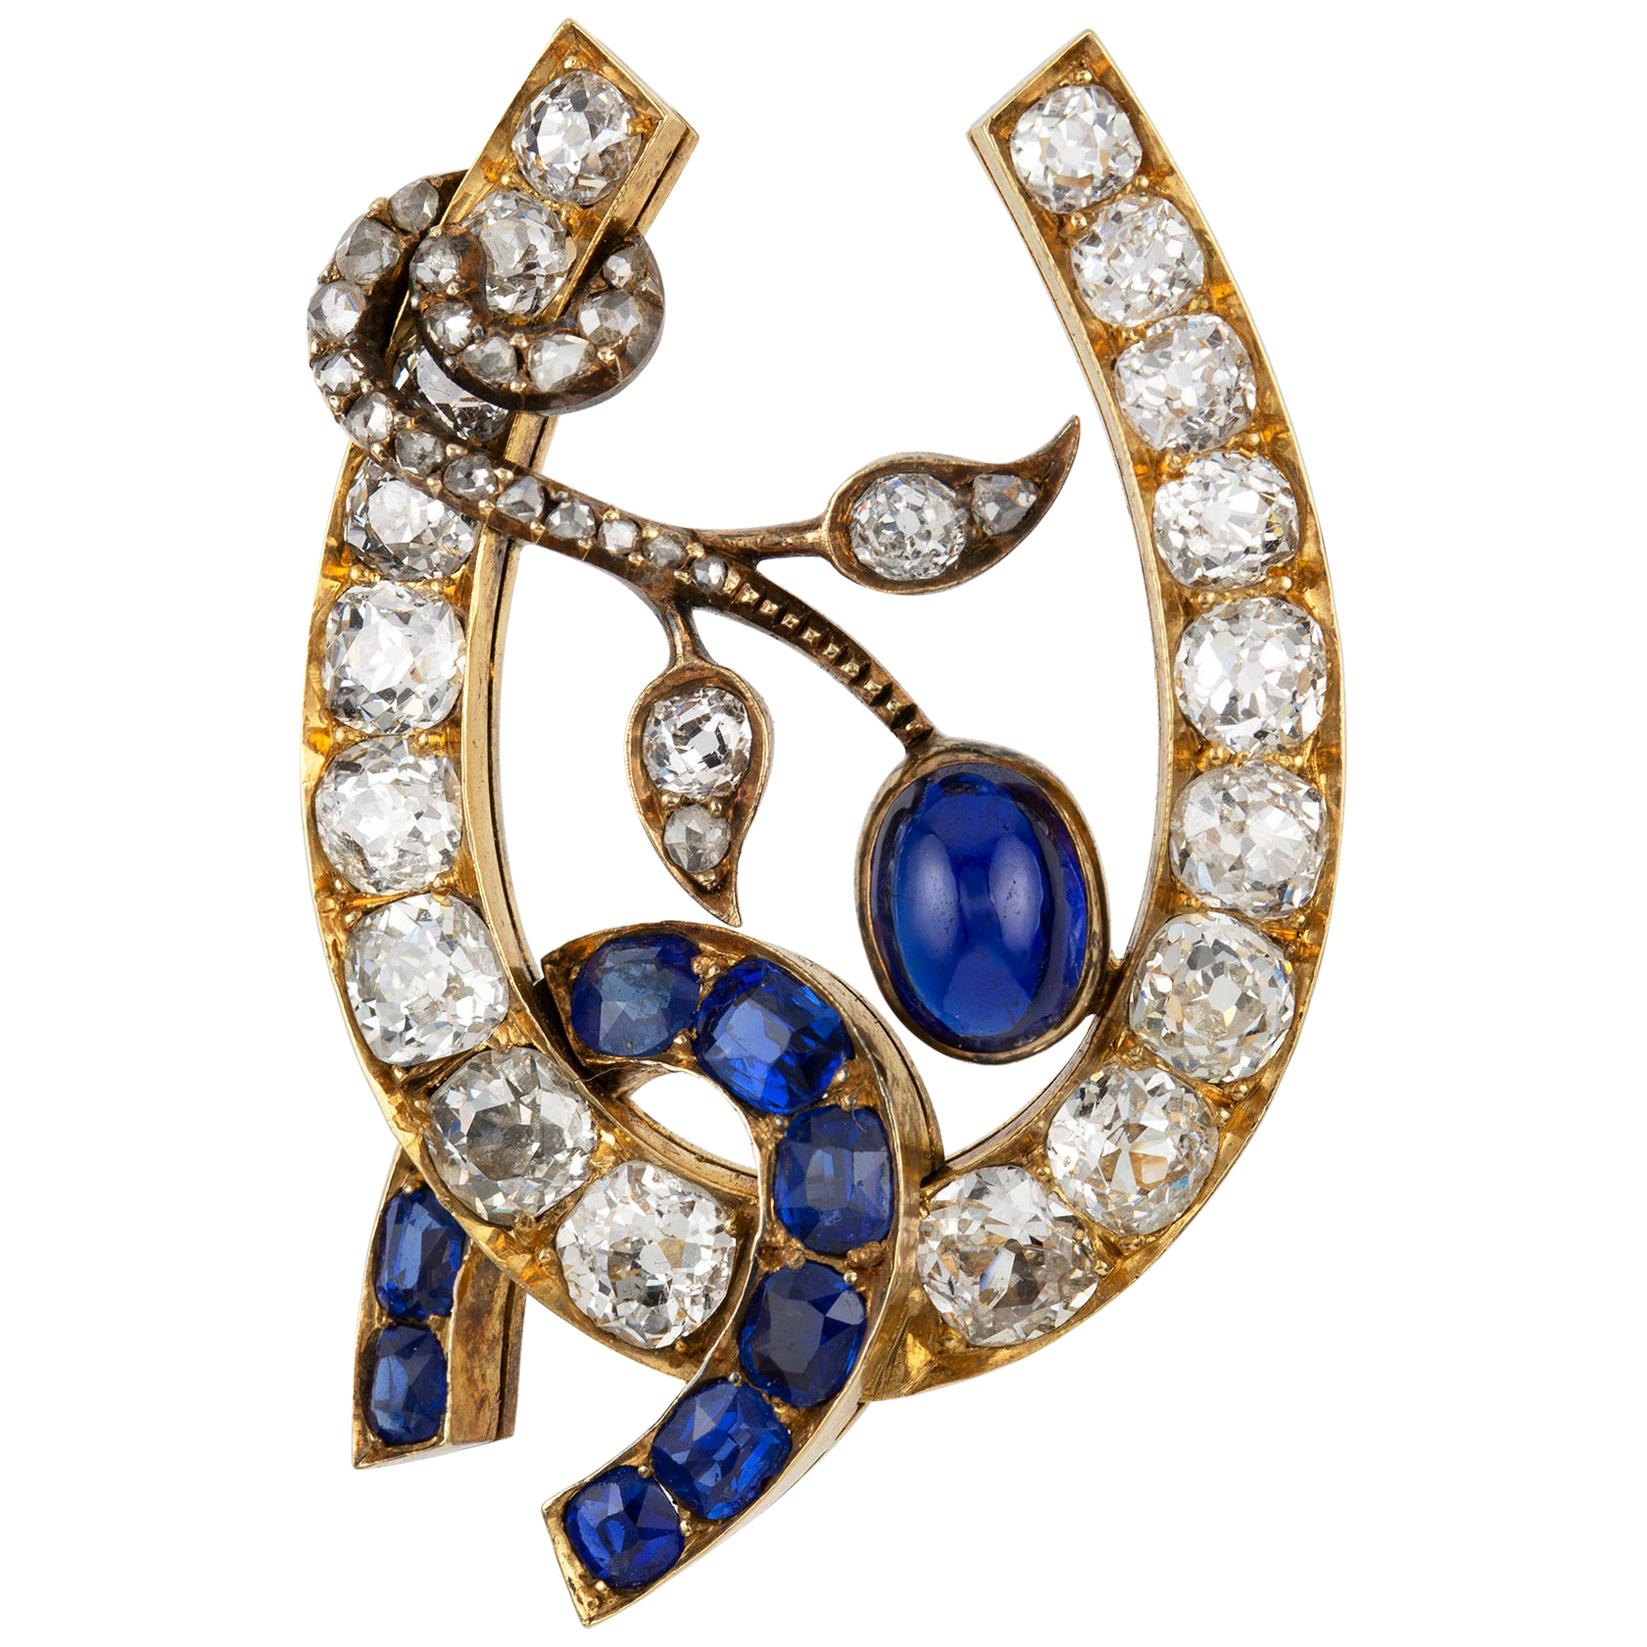 Russian Sapphire and Diamond Horse-Shoe Brooch